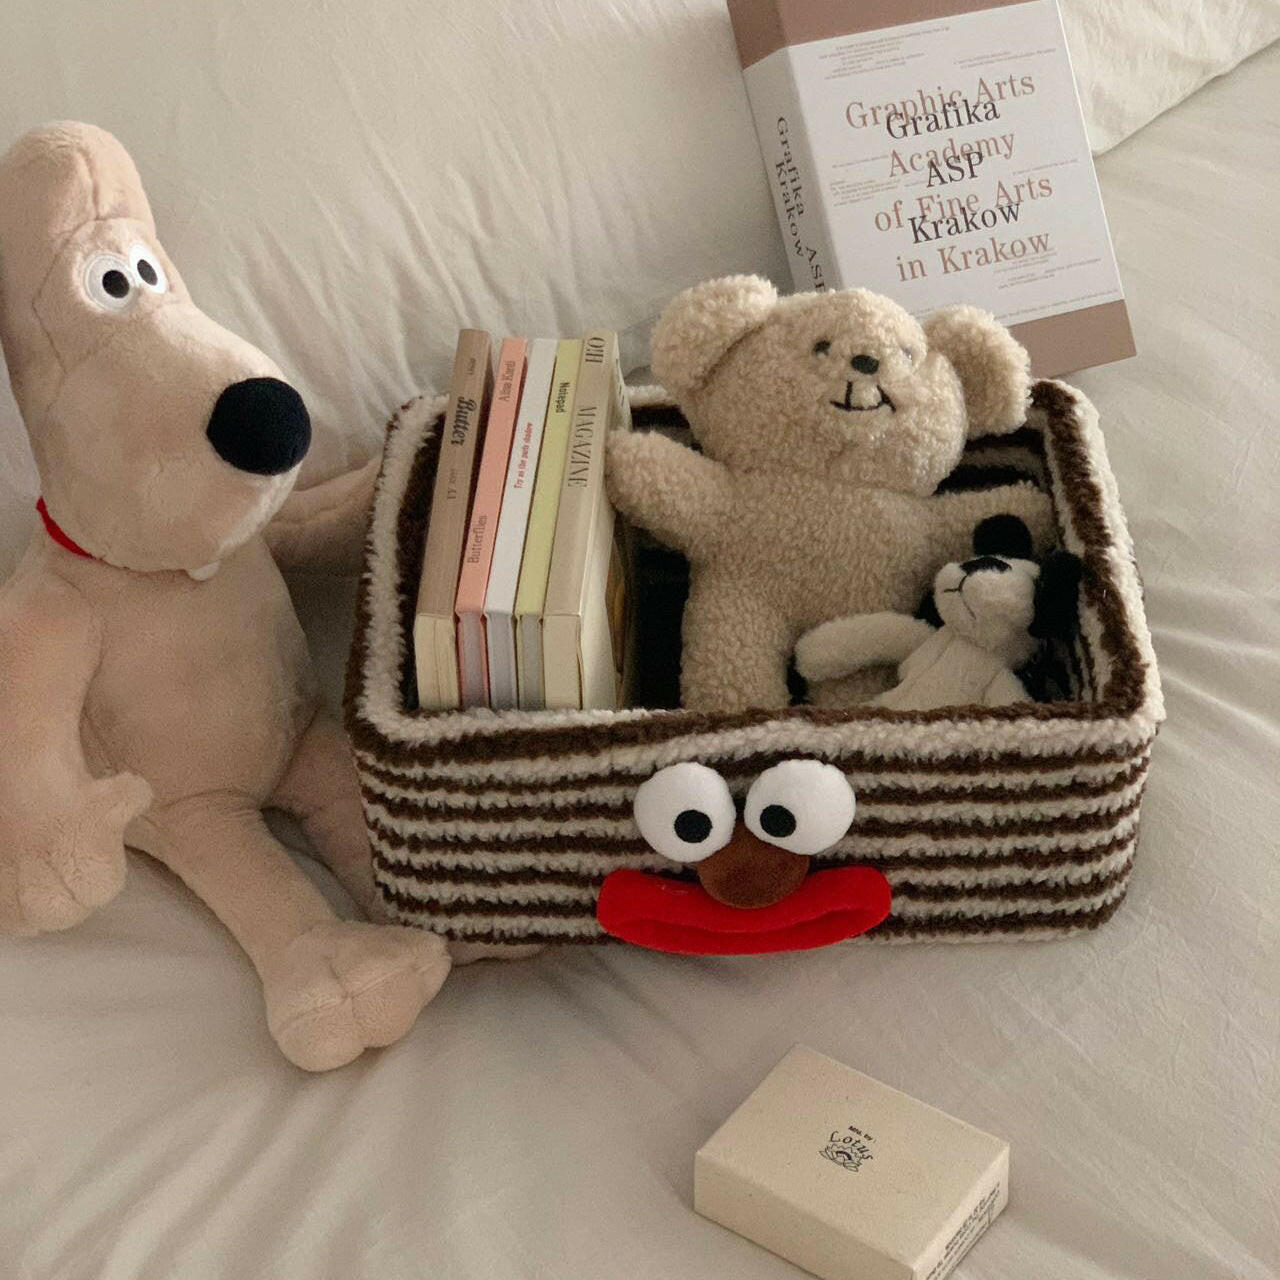 Plush Clown Organizer Drawer with books and toys in it